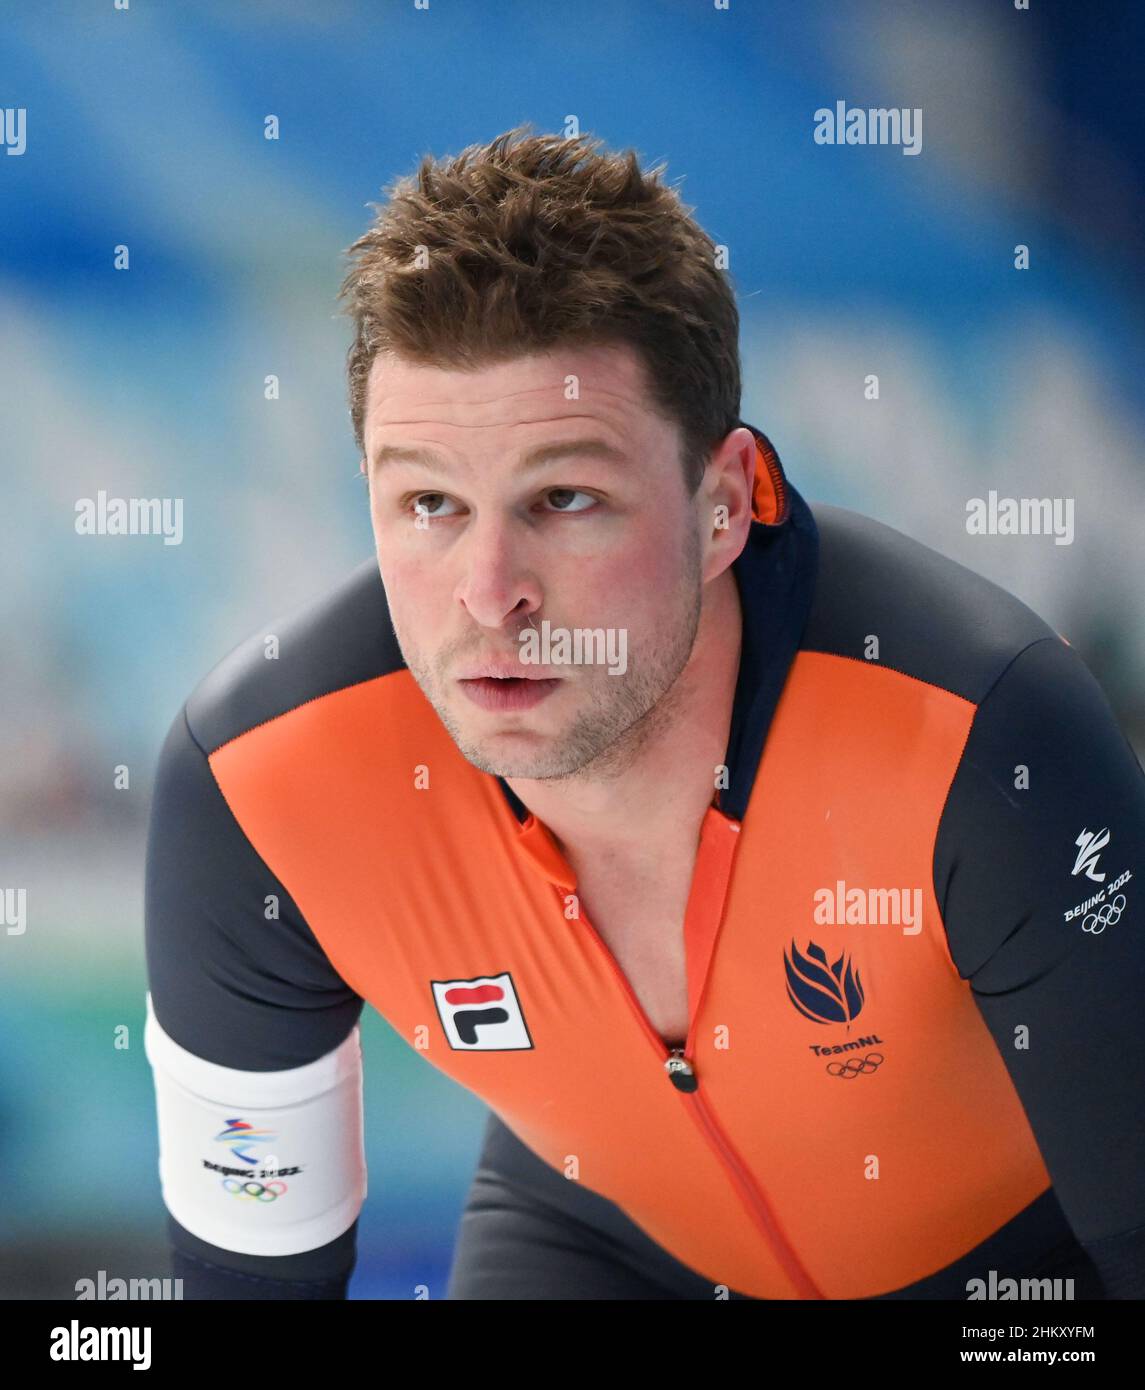 Beijing, China. 6th Feb, 2022. Sven Kramer of the Netherlands reacts during the men's 5,000m final of speed skating at the National Speed Skating Oval in Beijing, capital of China, Feb. 6, 2022. Credit: Wu Wei/Xinhua/Alamy Live News Stock Photo